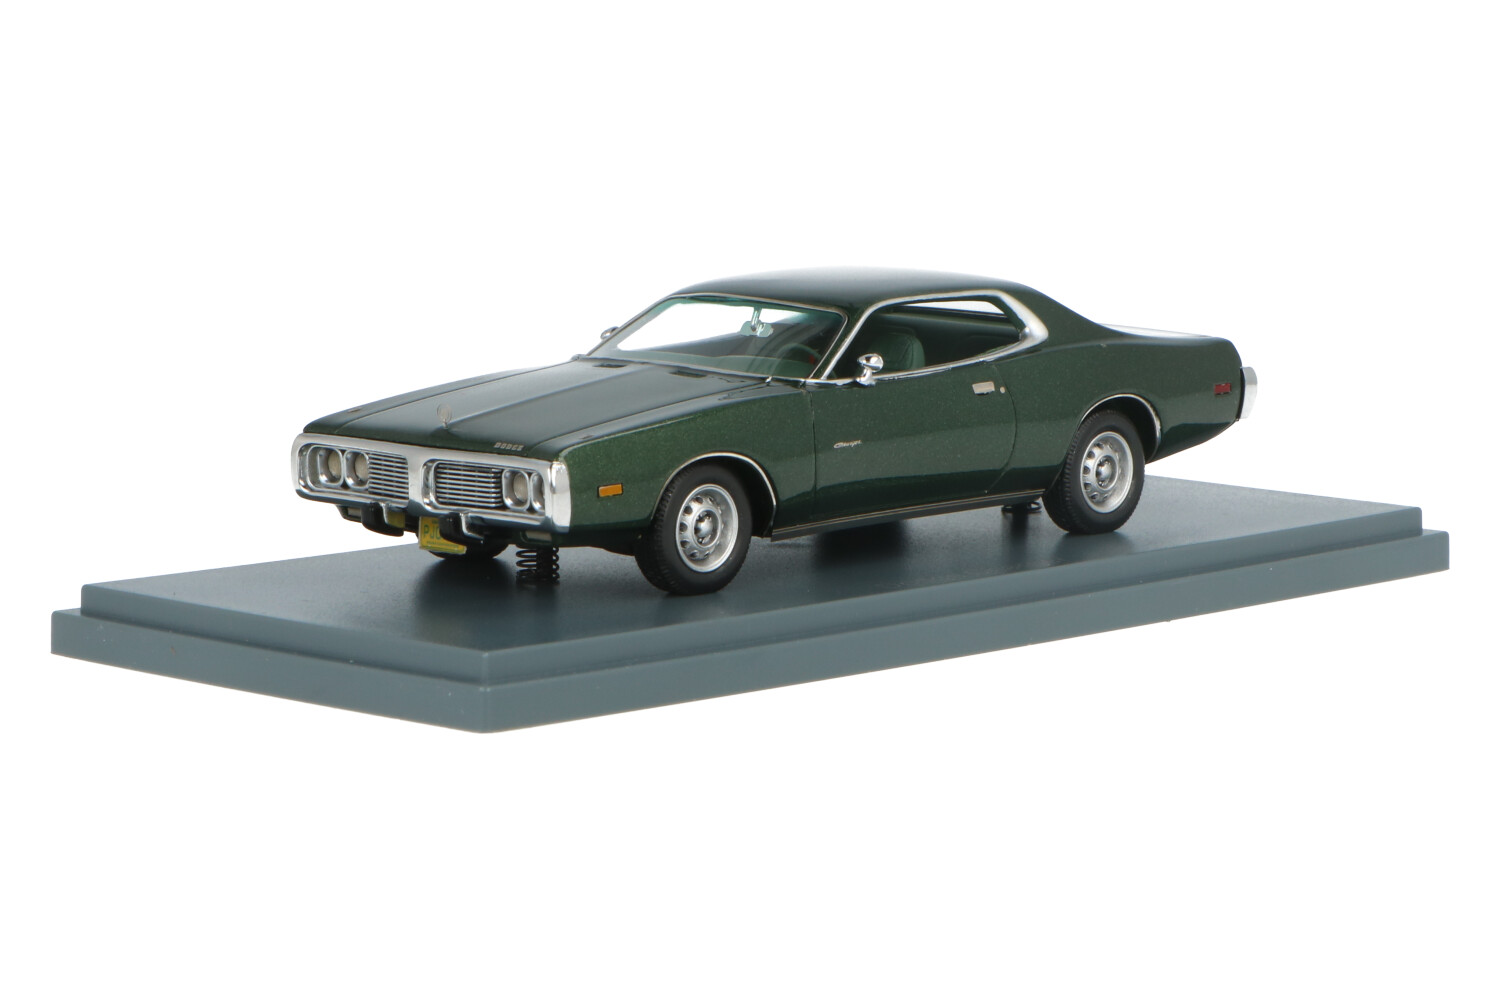 Dodge-Charger-NEO44751_1315874250447515Dodge-Charger-NEO44751_Houseofmodelcars_.jpg